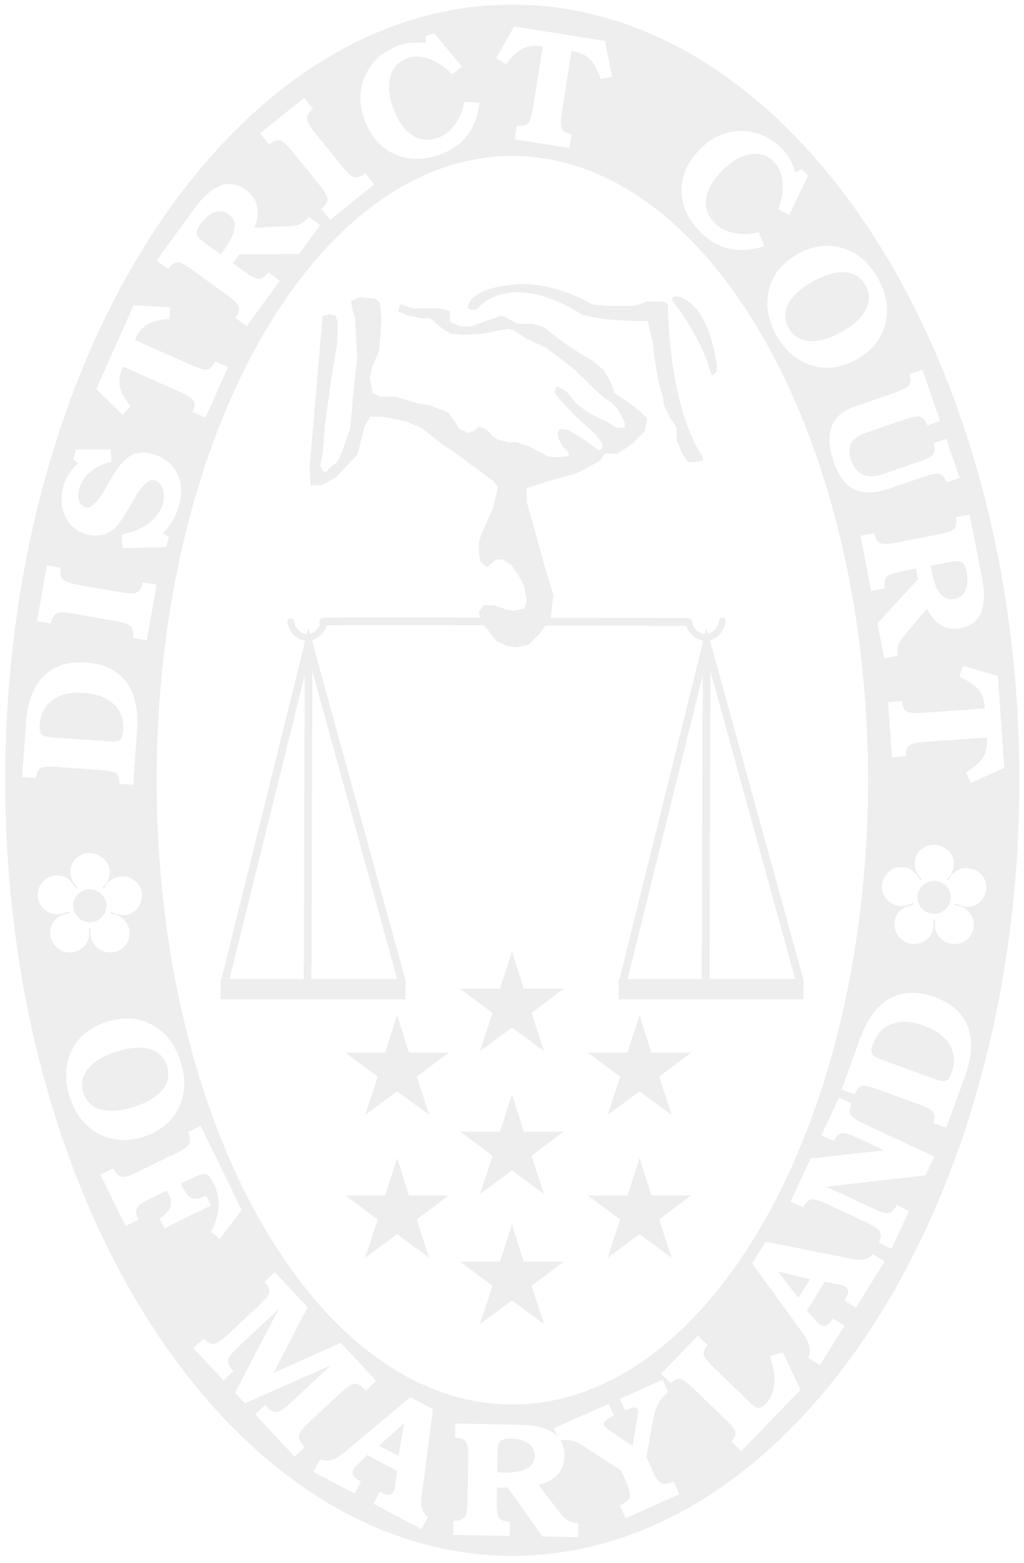 DISTRICT COURT OF MARYLAND ALTERNATIVE DISPUTE RESOLUTION OFFICE ADR VOLUNTEER CLASSIFICATION Describes a volunteer s role on our roster.